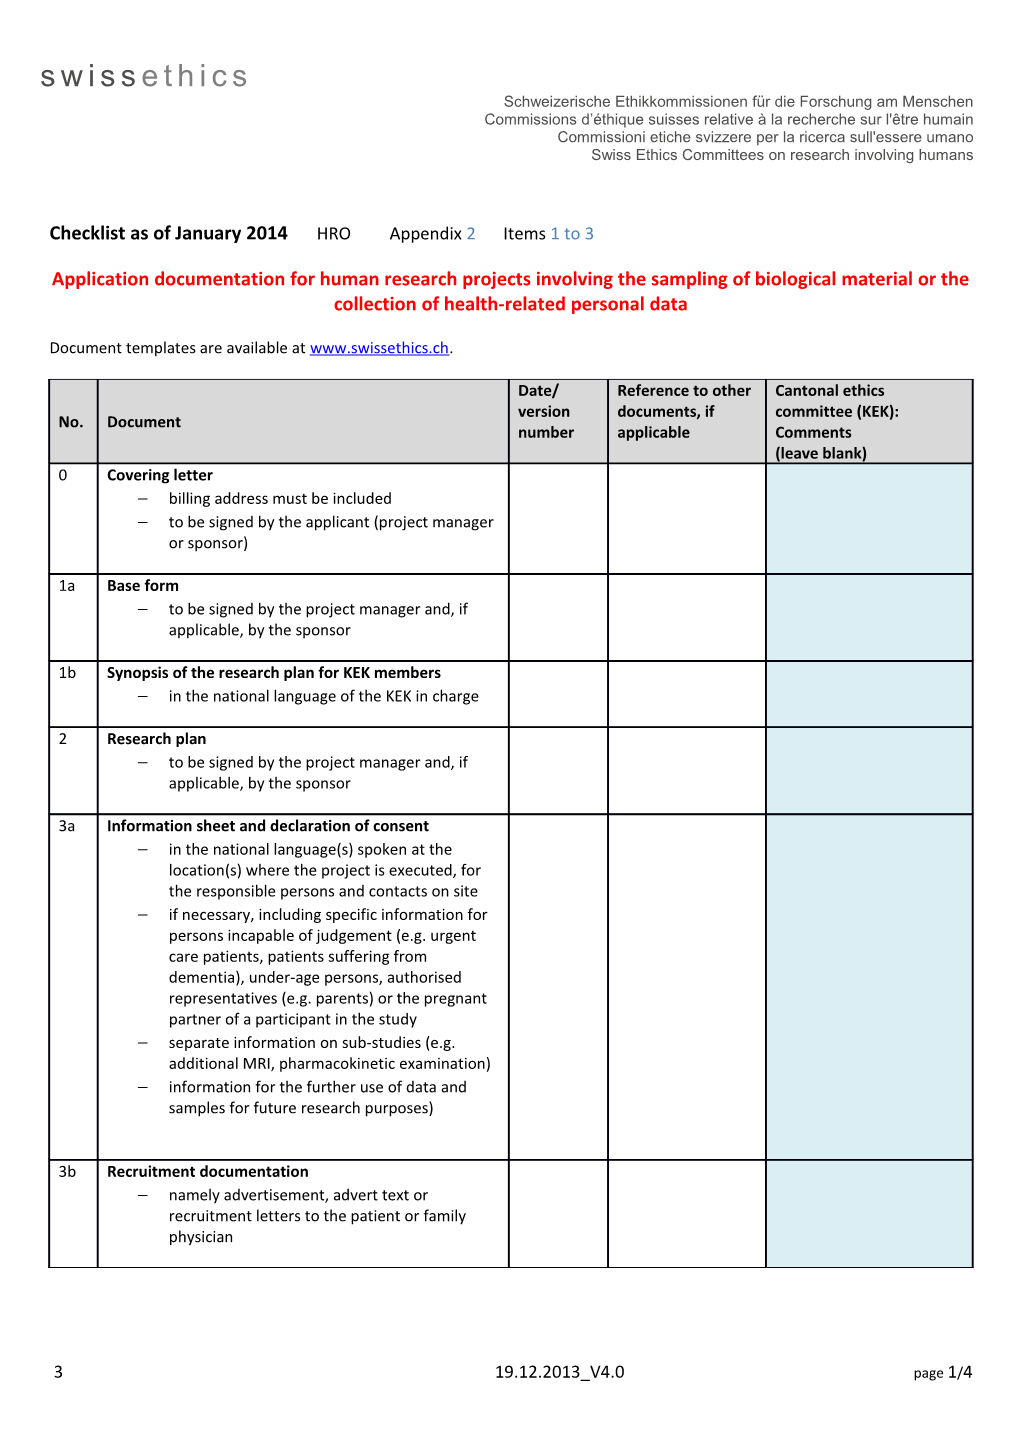 Checklist As of January 2014 HRO Appendix 2 Items 1 to 3